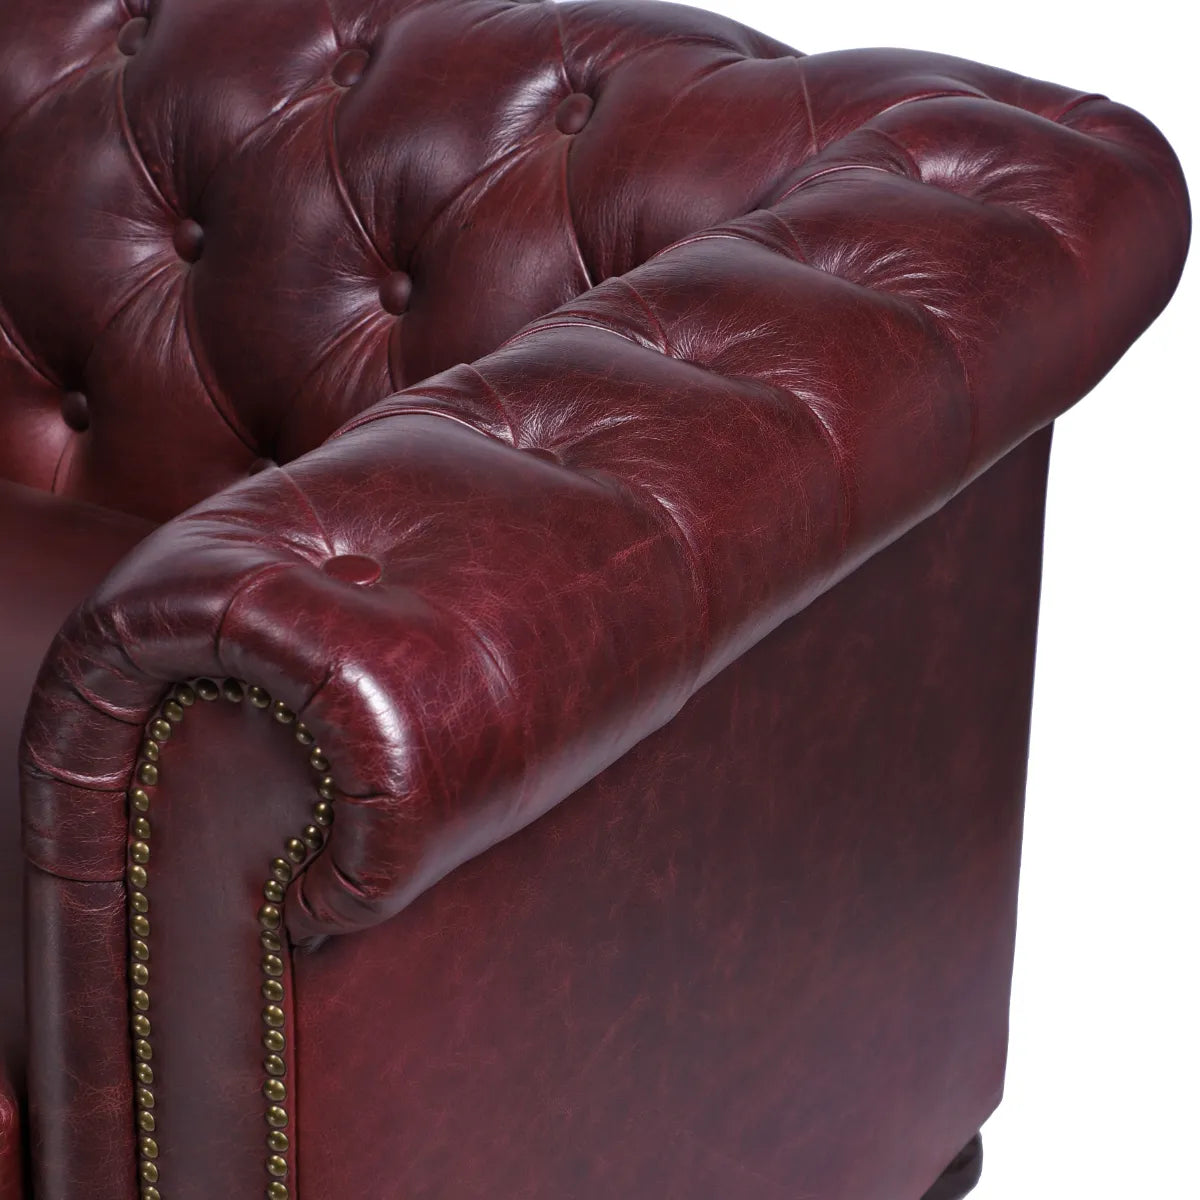 Genuine Leather Chesterfield Two Seater Sofa In Burgundy Colour